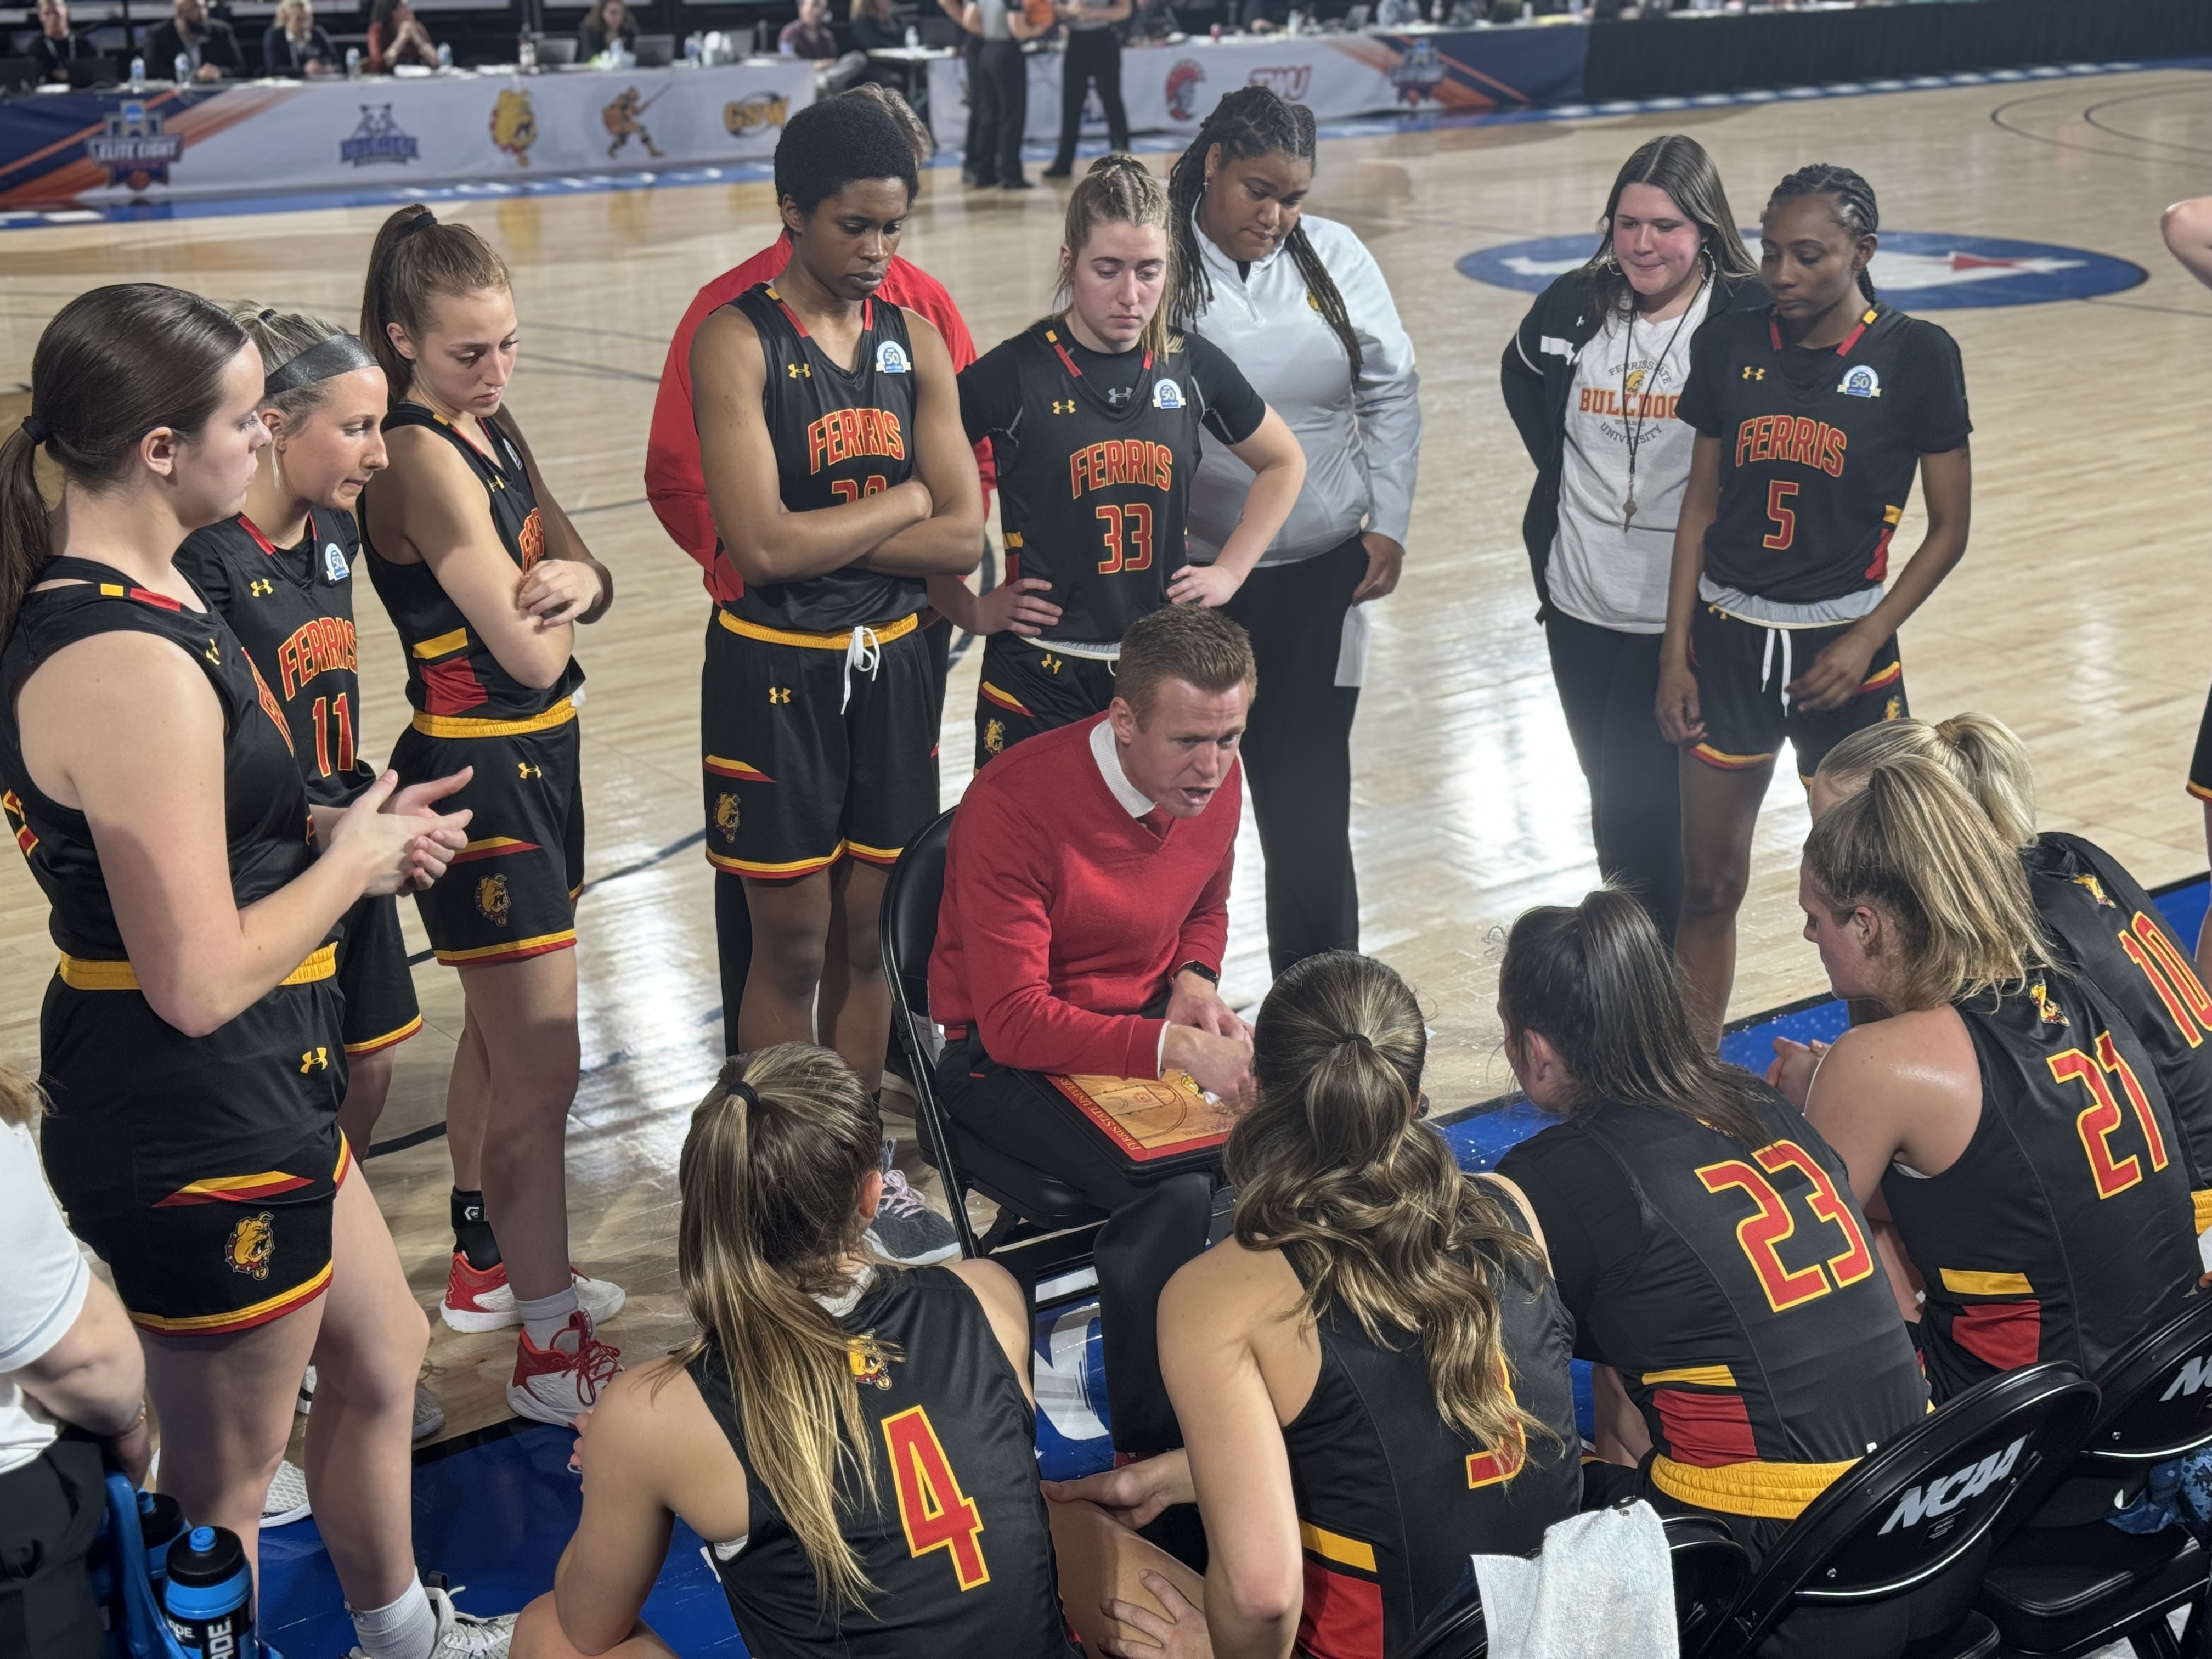 Ferris State's historic women's basketball season ends in national semifinals